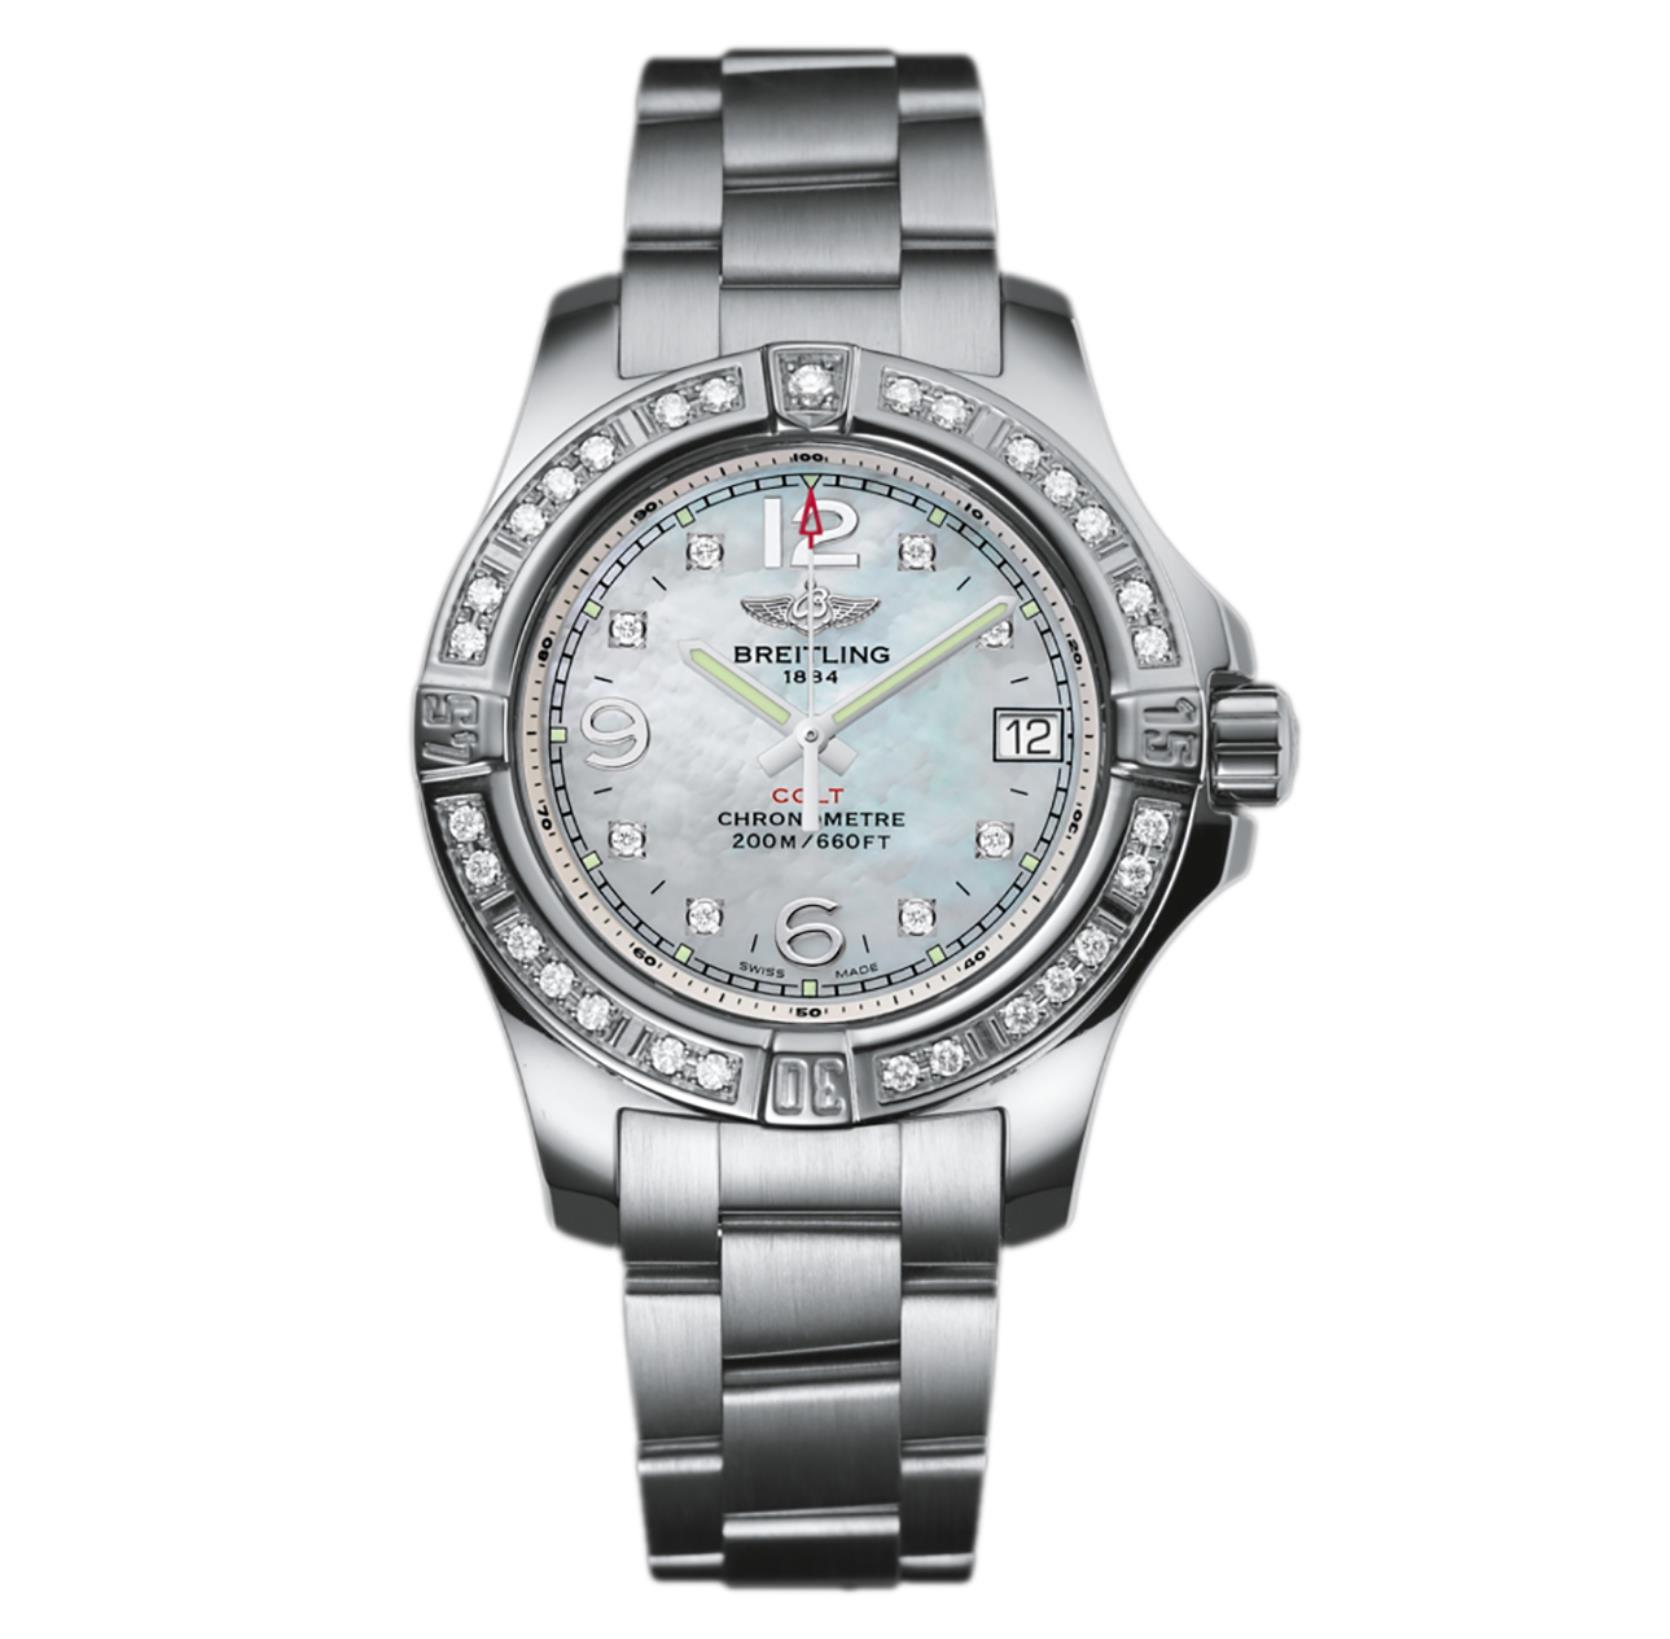 The stainless steel fake watch is decorated with diamonds.